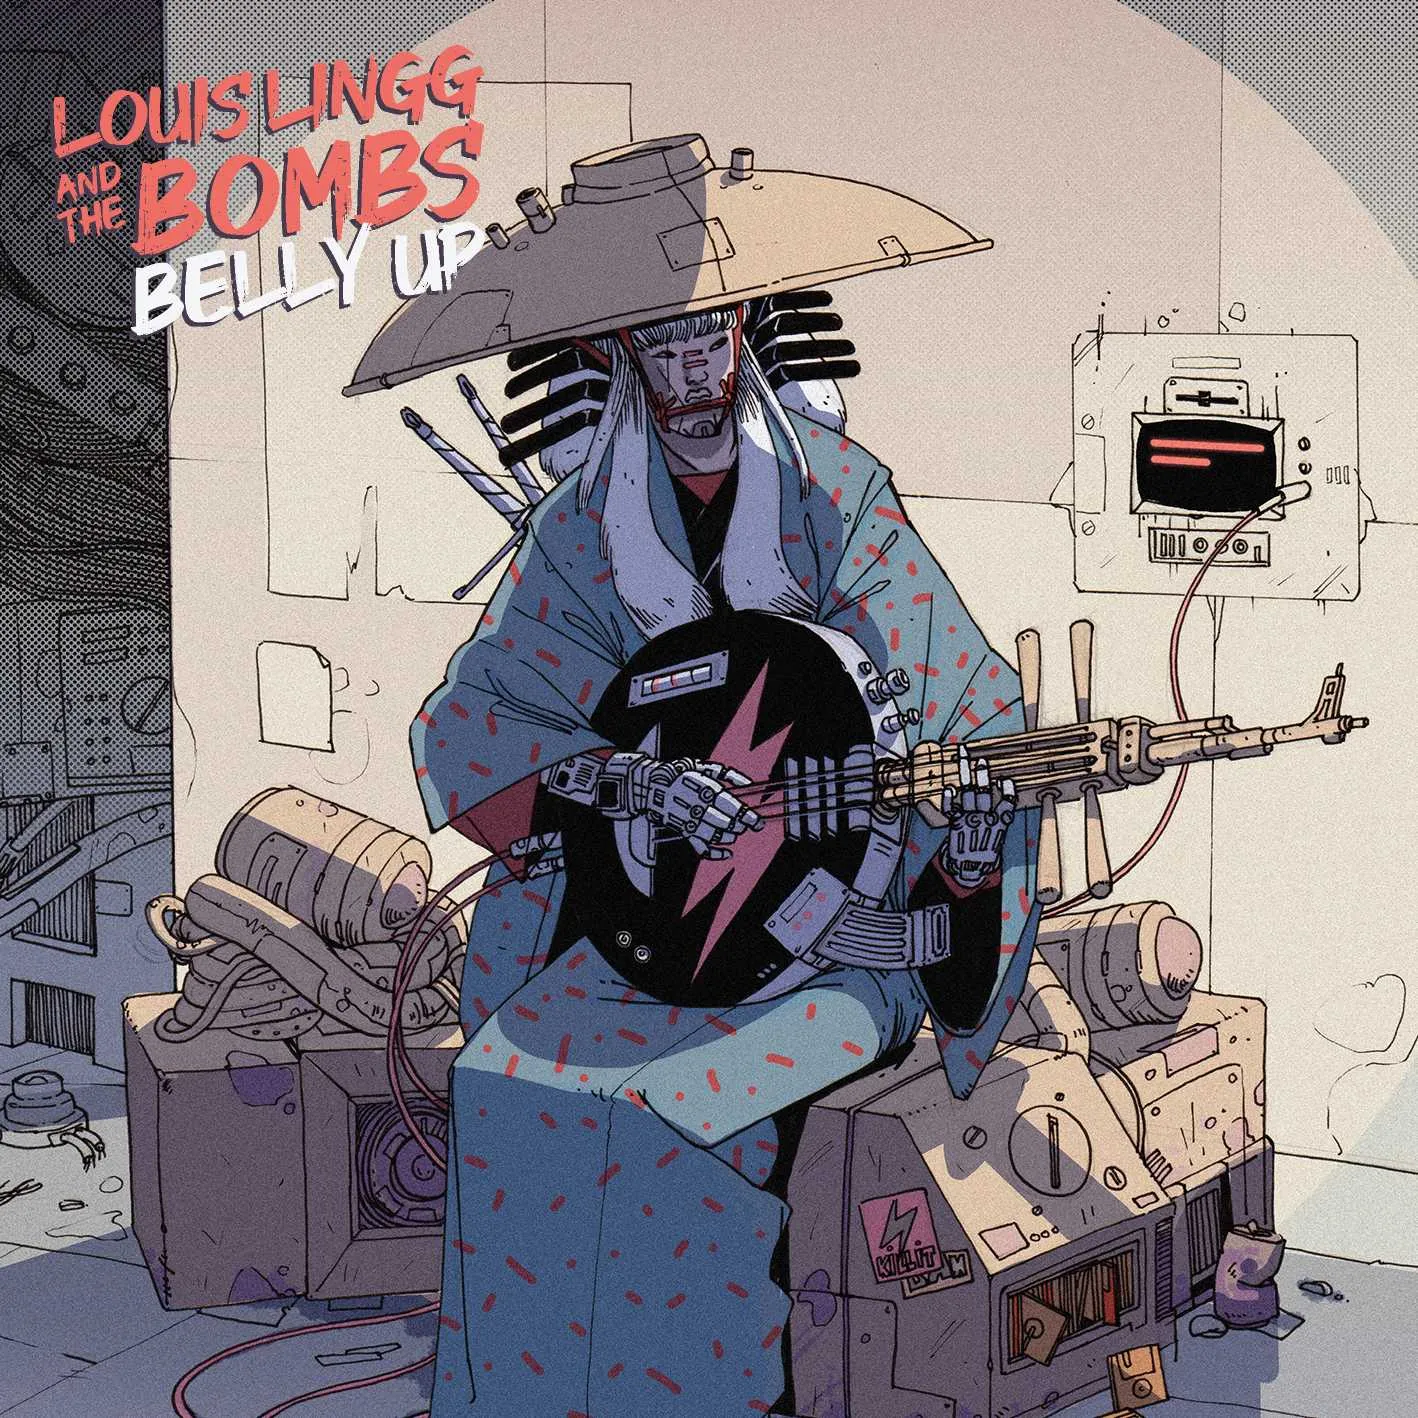 Album cover for “Belly Up” by Louis Lingg and The Bombs